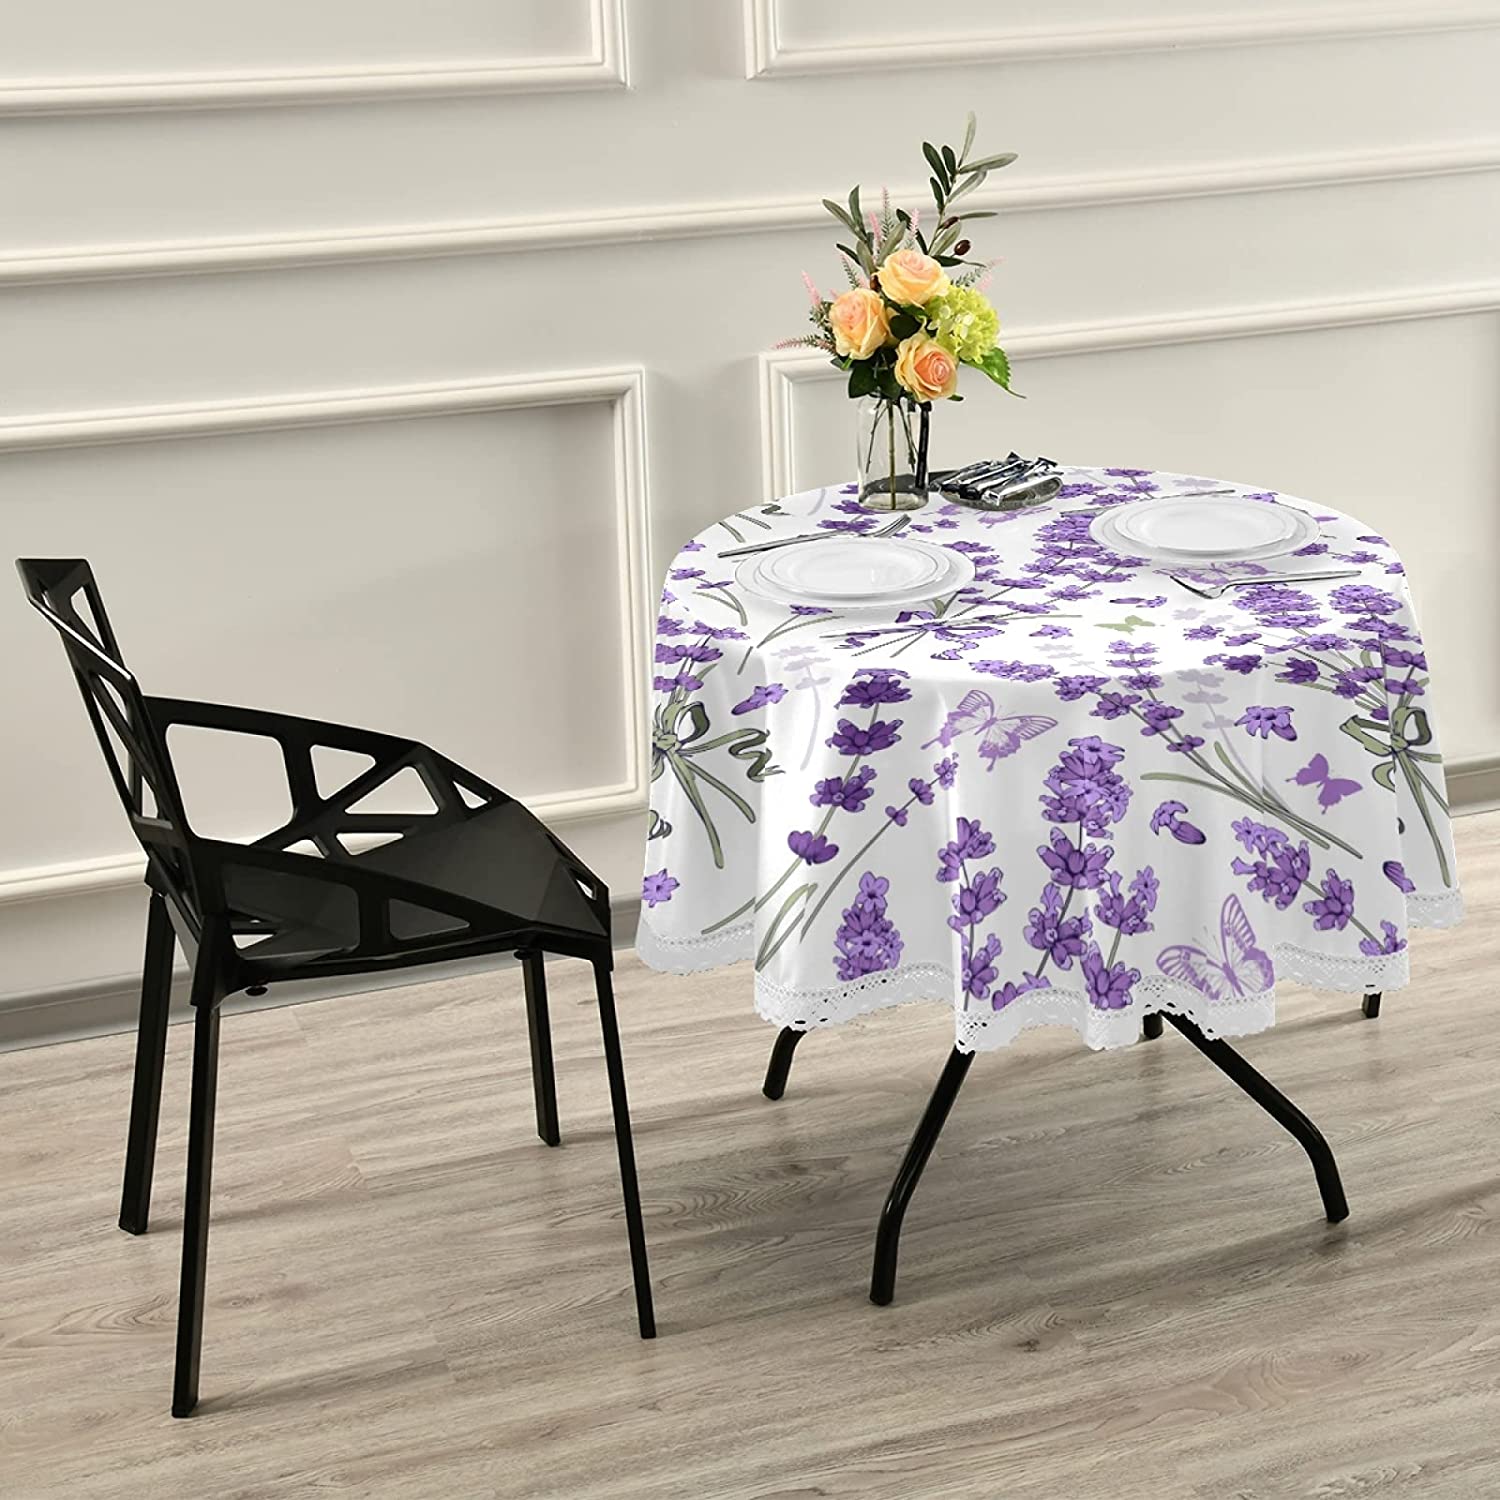 Floral Lavender Round Tablecloth Washable Table Cloths Cover For Party Picnic Dining Décor